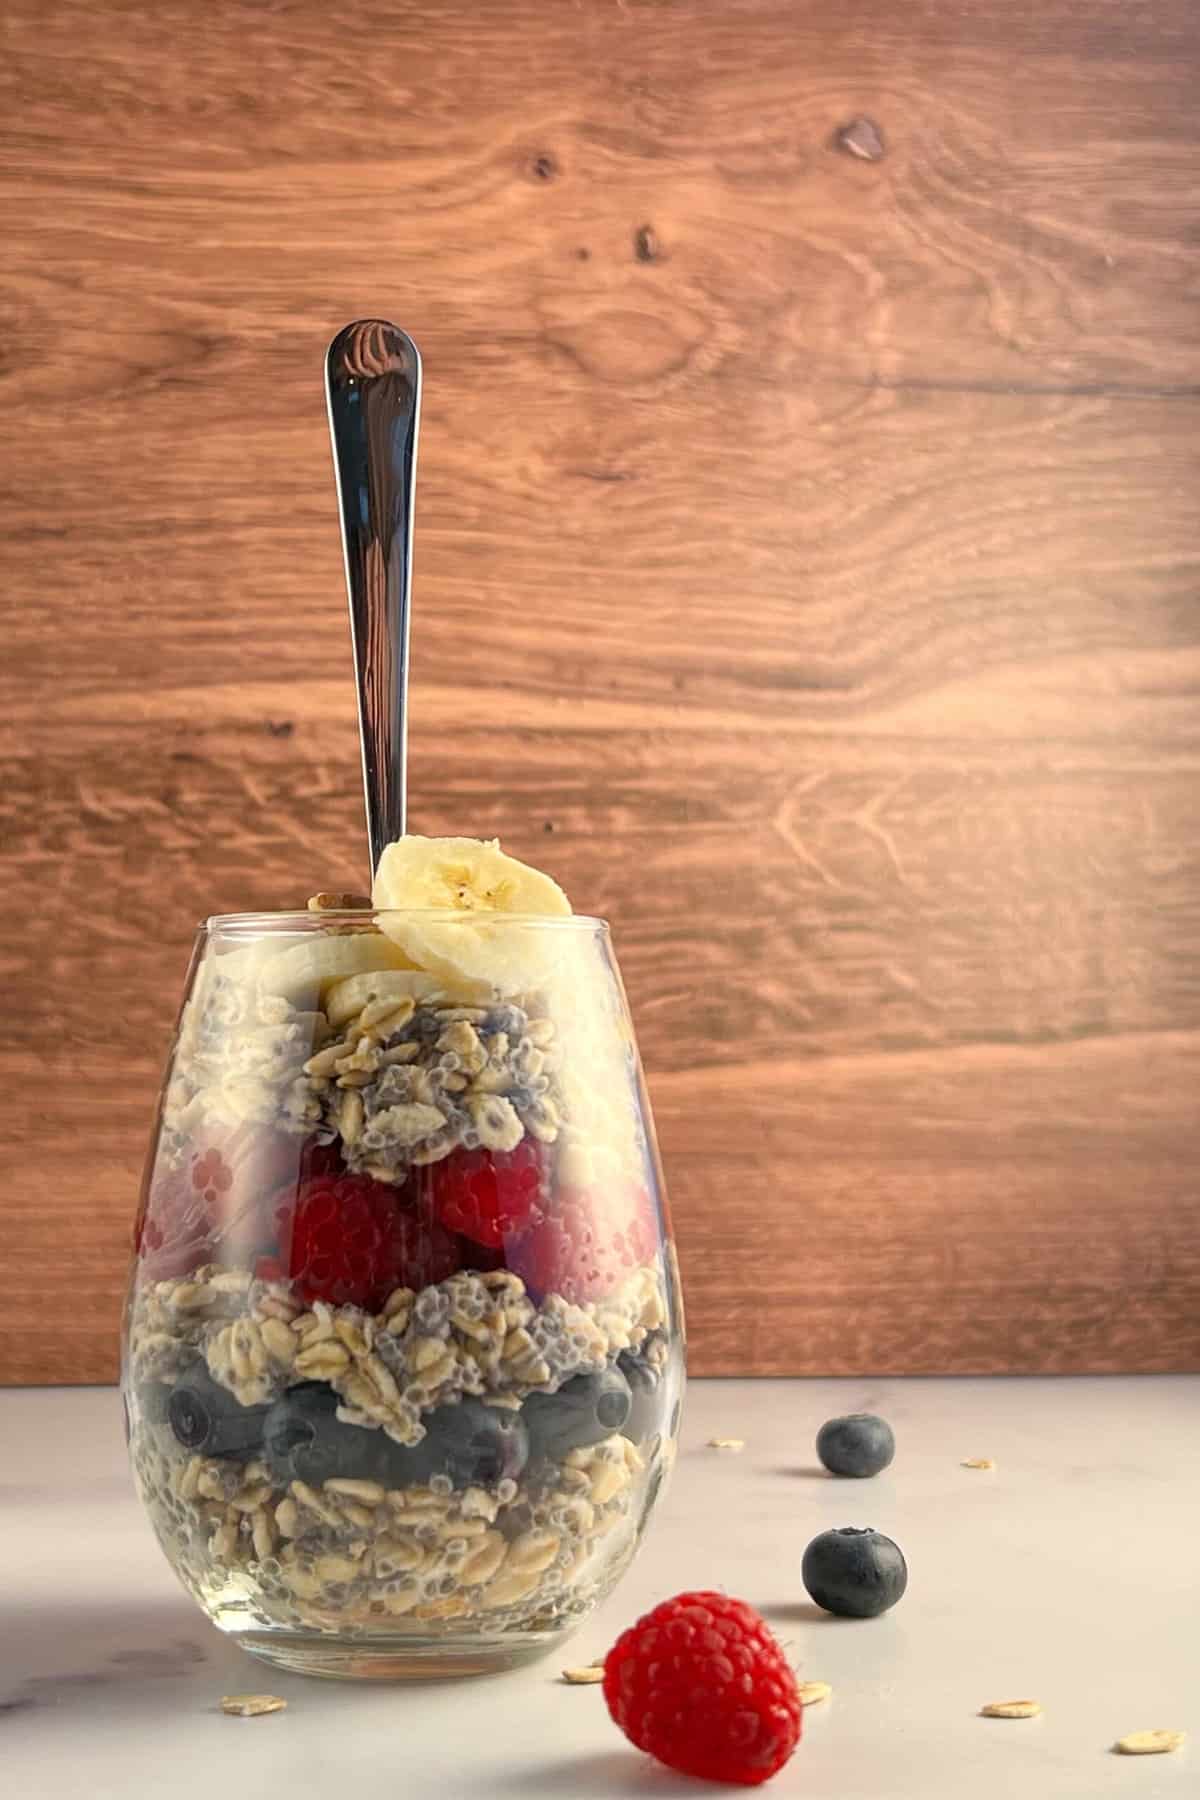 side view of overnight oats layered in a glass with blueberries, raspberries, banana